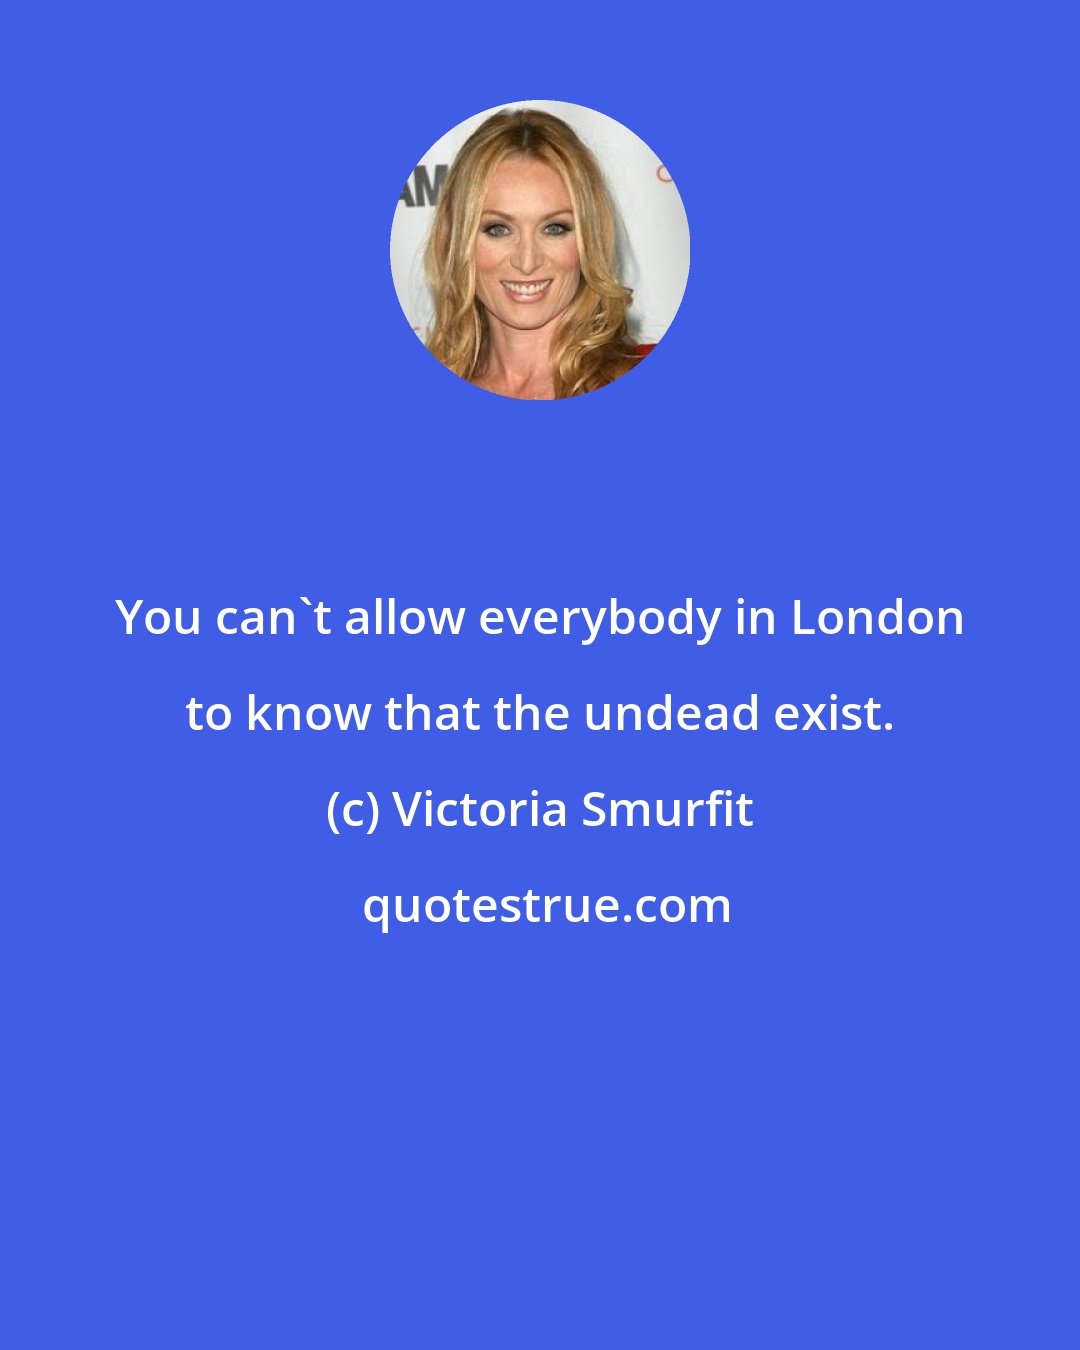 Victoria Smurfit: You can't allow everybody in London to know that the undead exist.